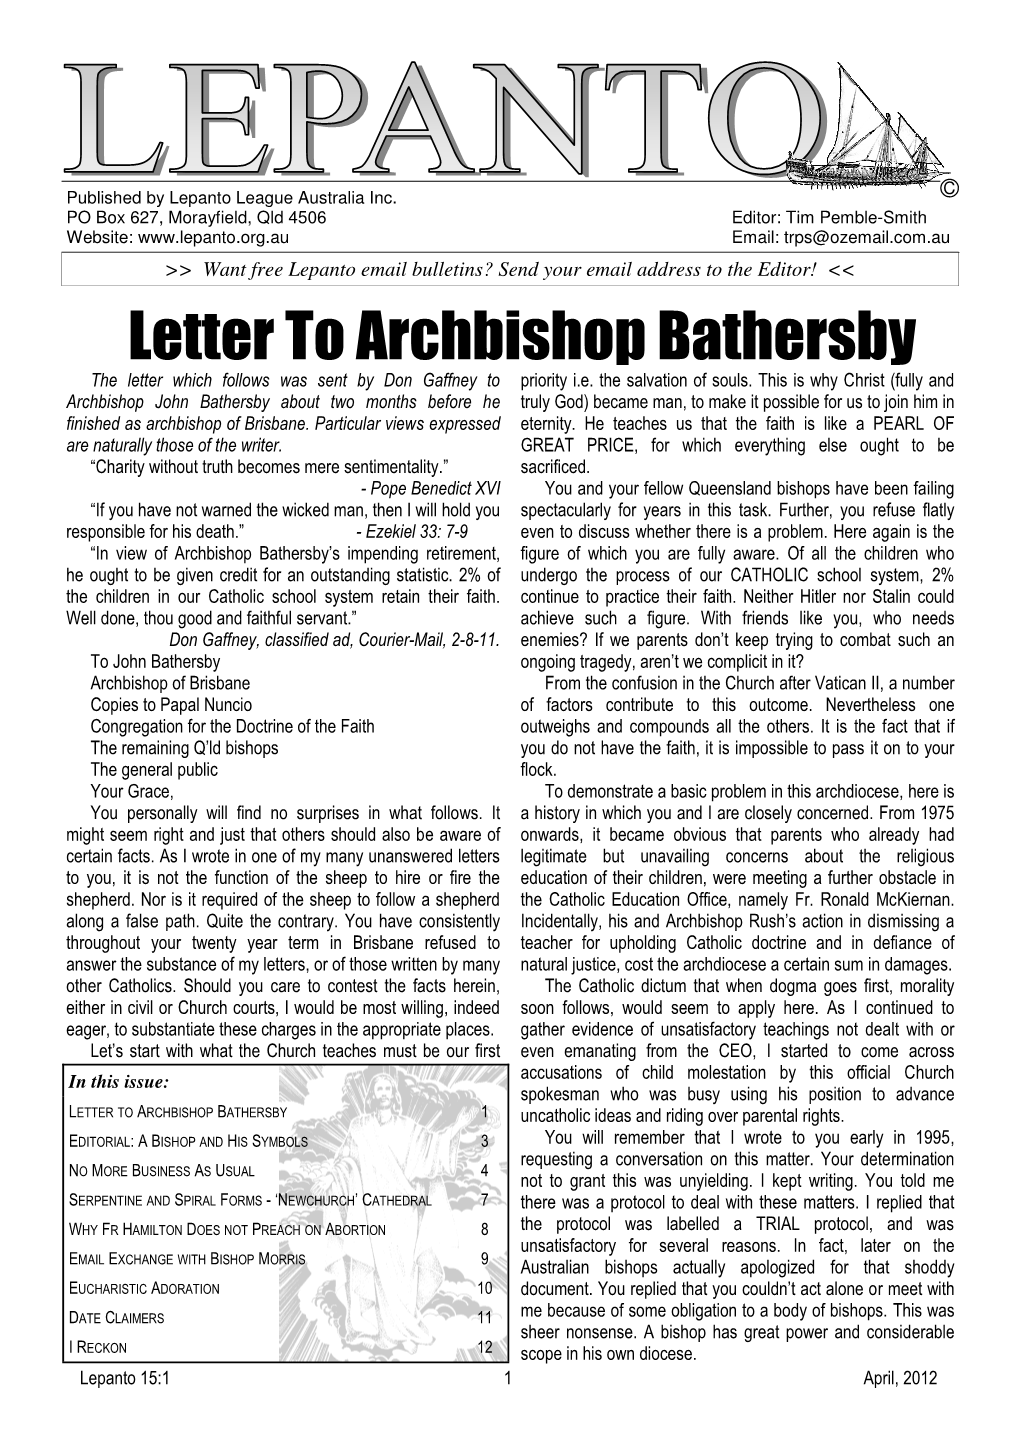 Letter to Archbishop Bathersby the Letter Which Follows Was Sent by Don Gaffney to Priority I.E